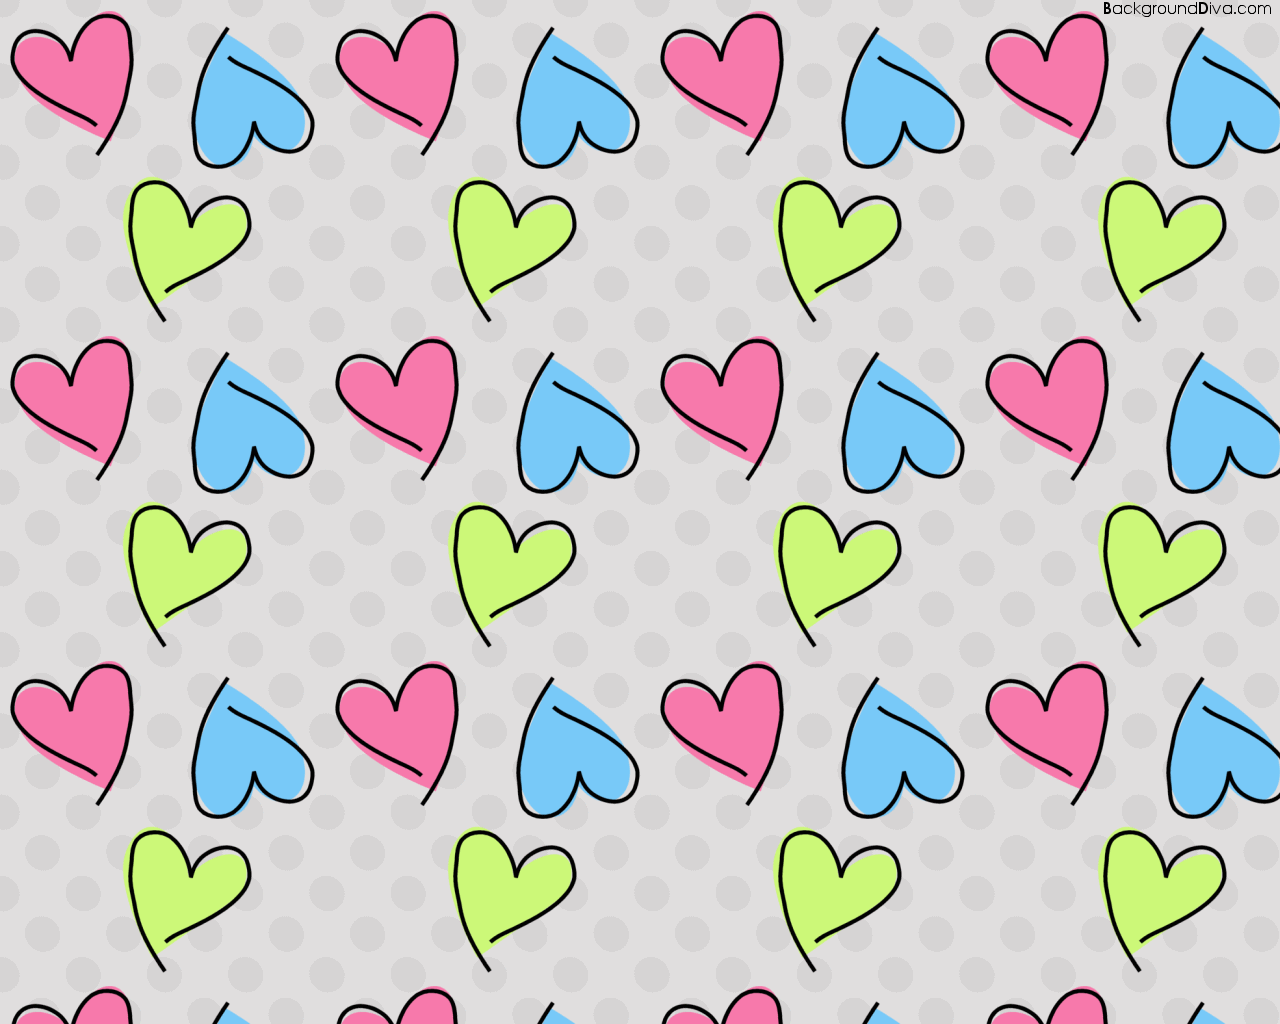 Wallpaper For Putermore Girly Hearts Desktop Background